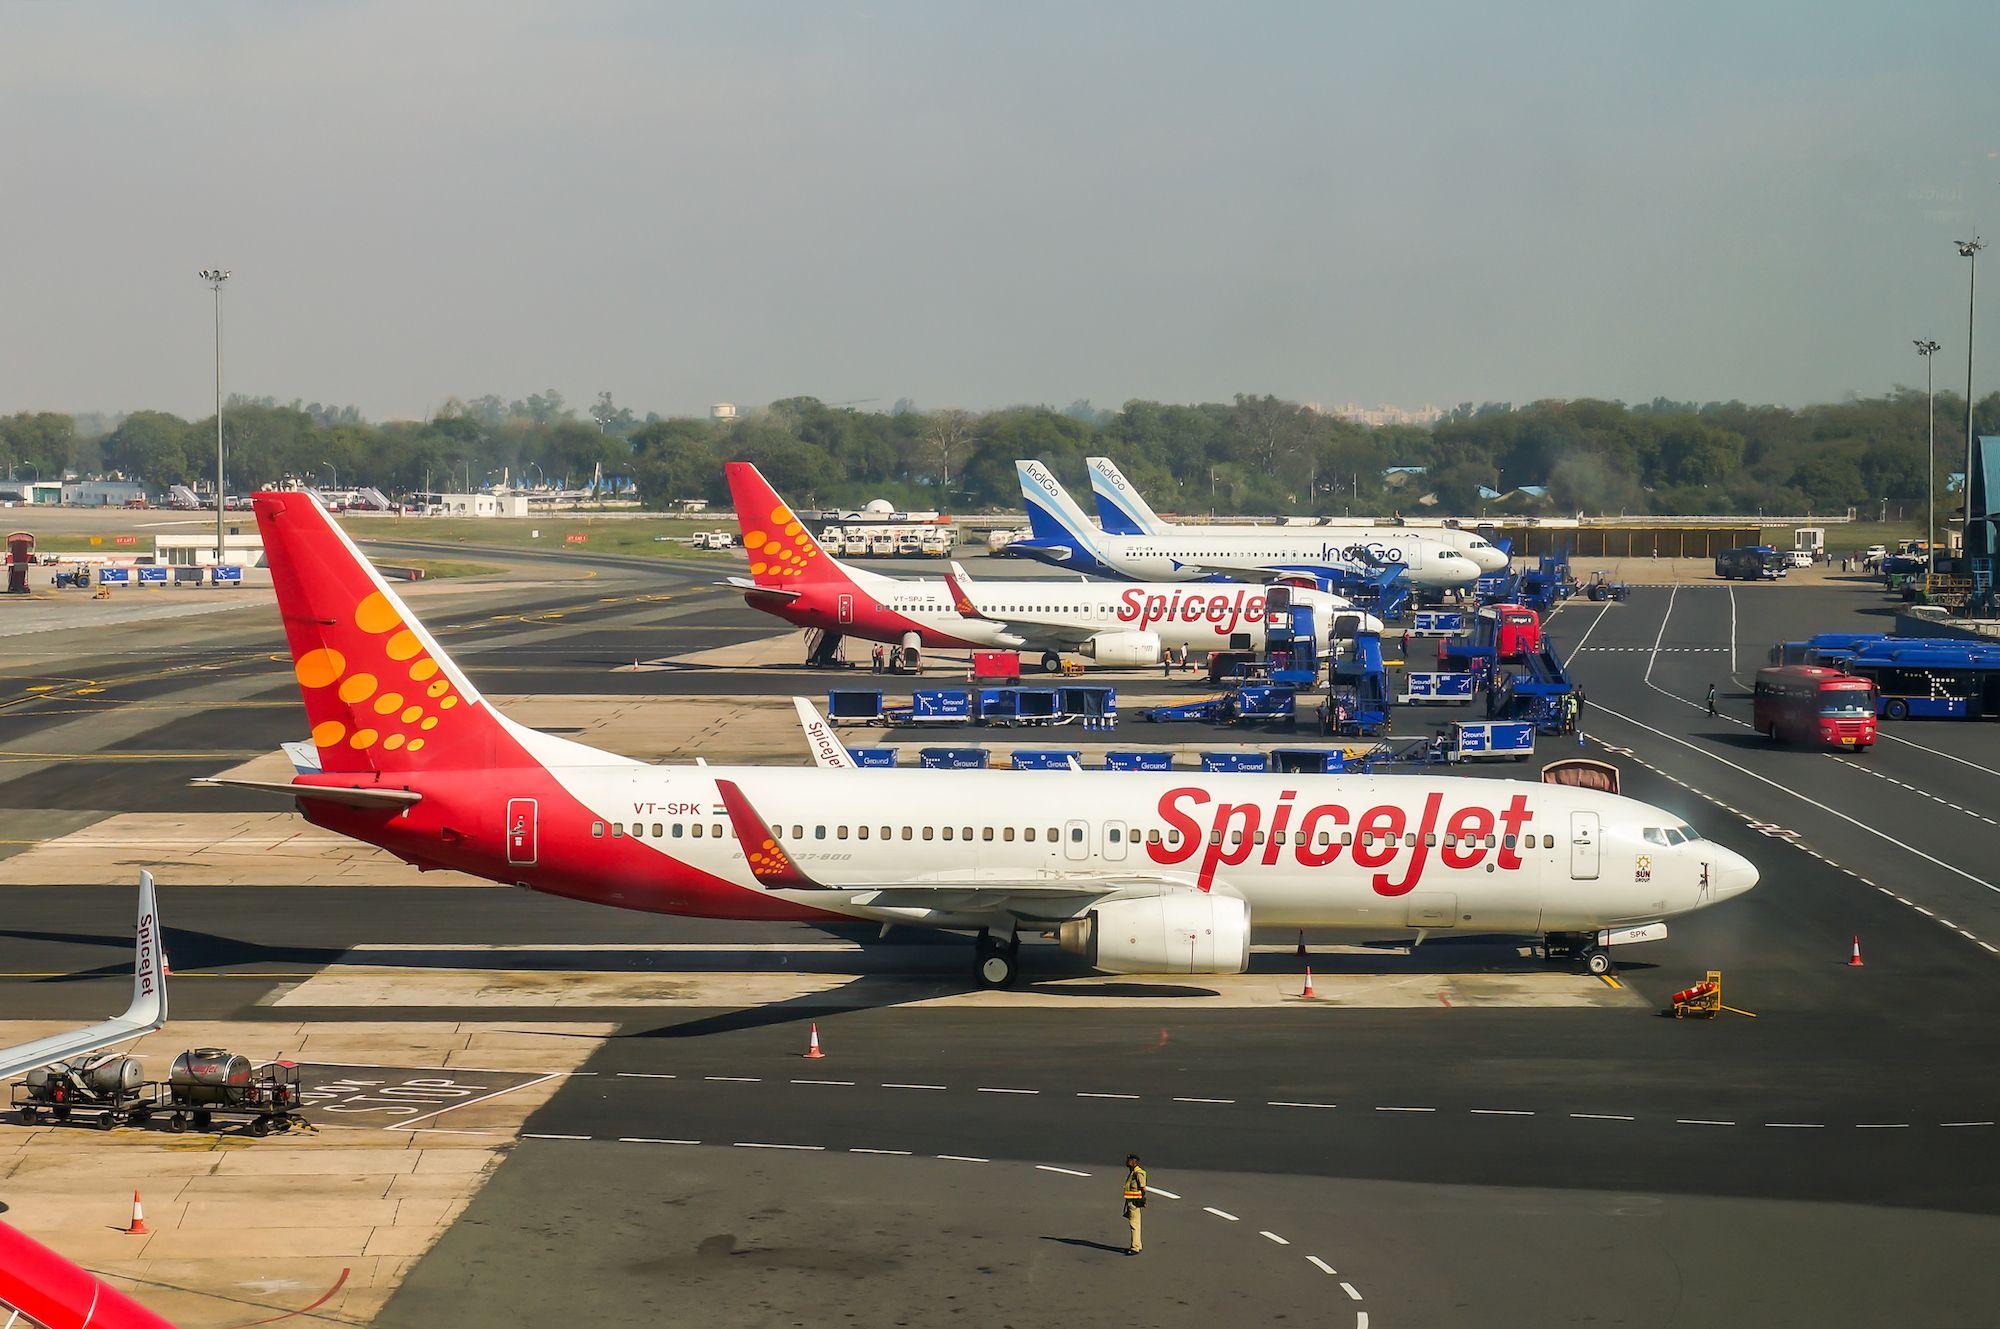 SpiceJet Boeing 737 at Delhi Indhira Gandhi International Airport DEL with IndiGo aircraft in the background